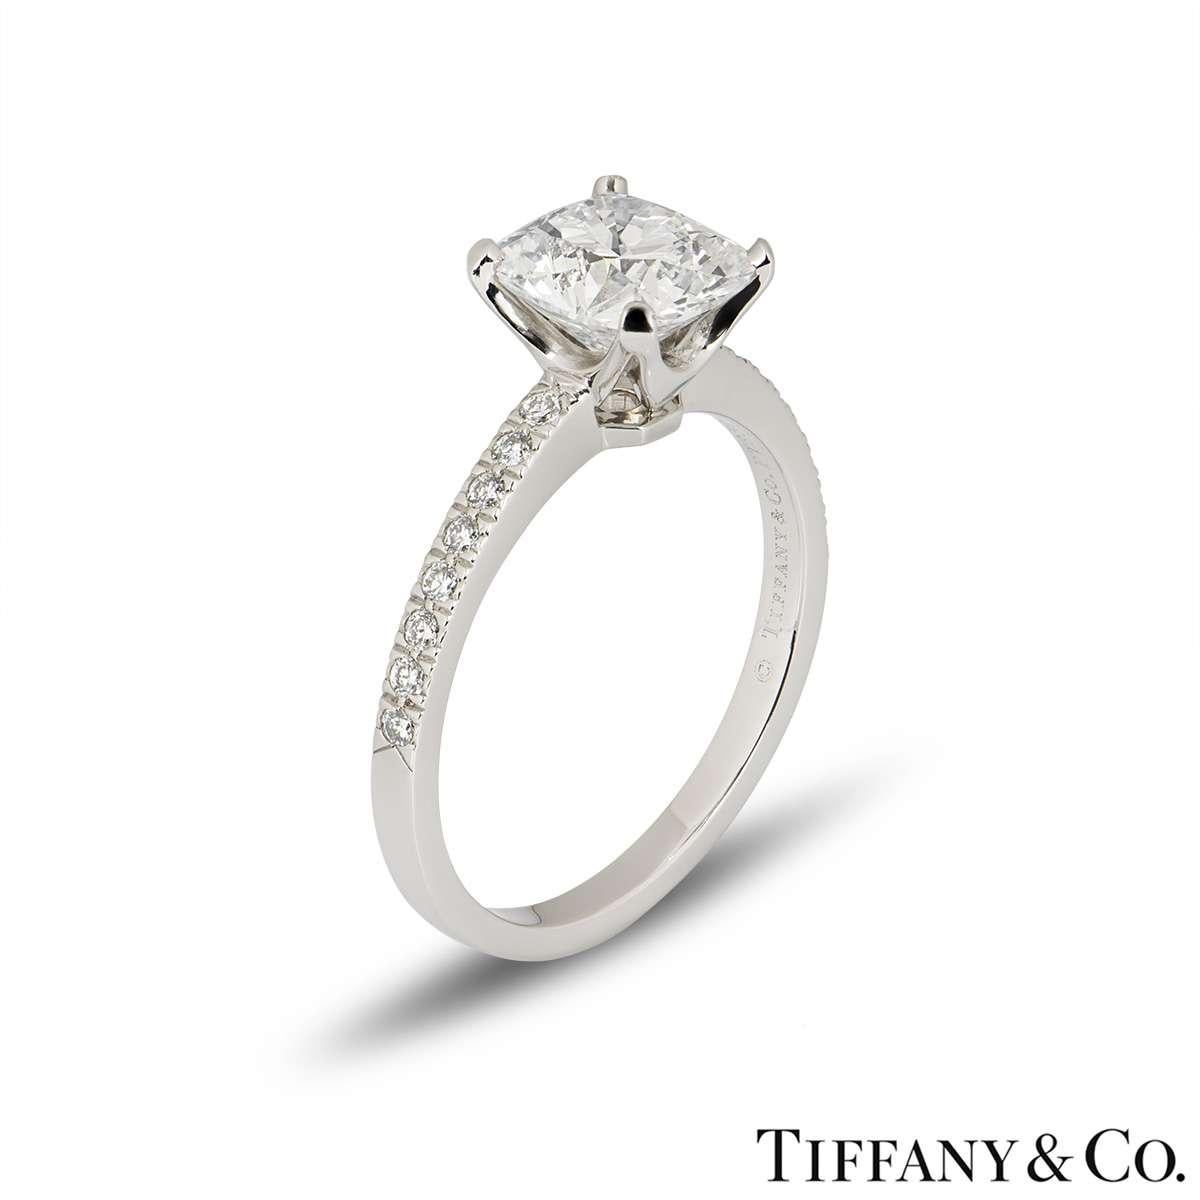 An eye-catching diamond ring in platinum from the Novo collection by Tiffany & Co. The ring is set to the centre with a 2.22ct cushion cut diamond in a classic 4 claw setting. The diamond is G colour and VVS1 clarity. Set to either side of the